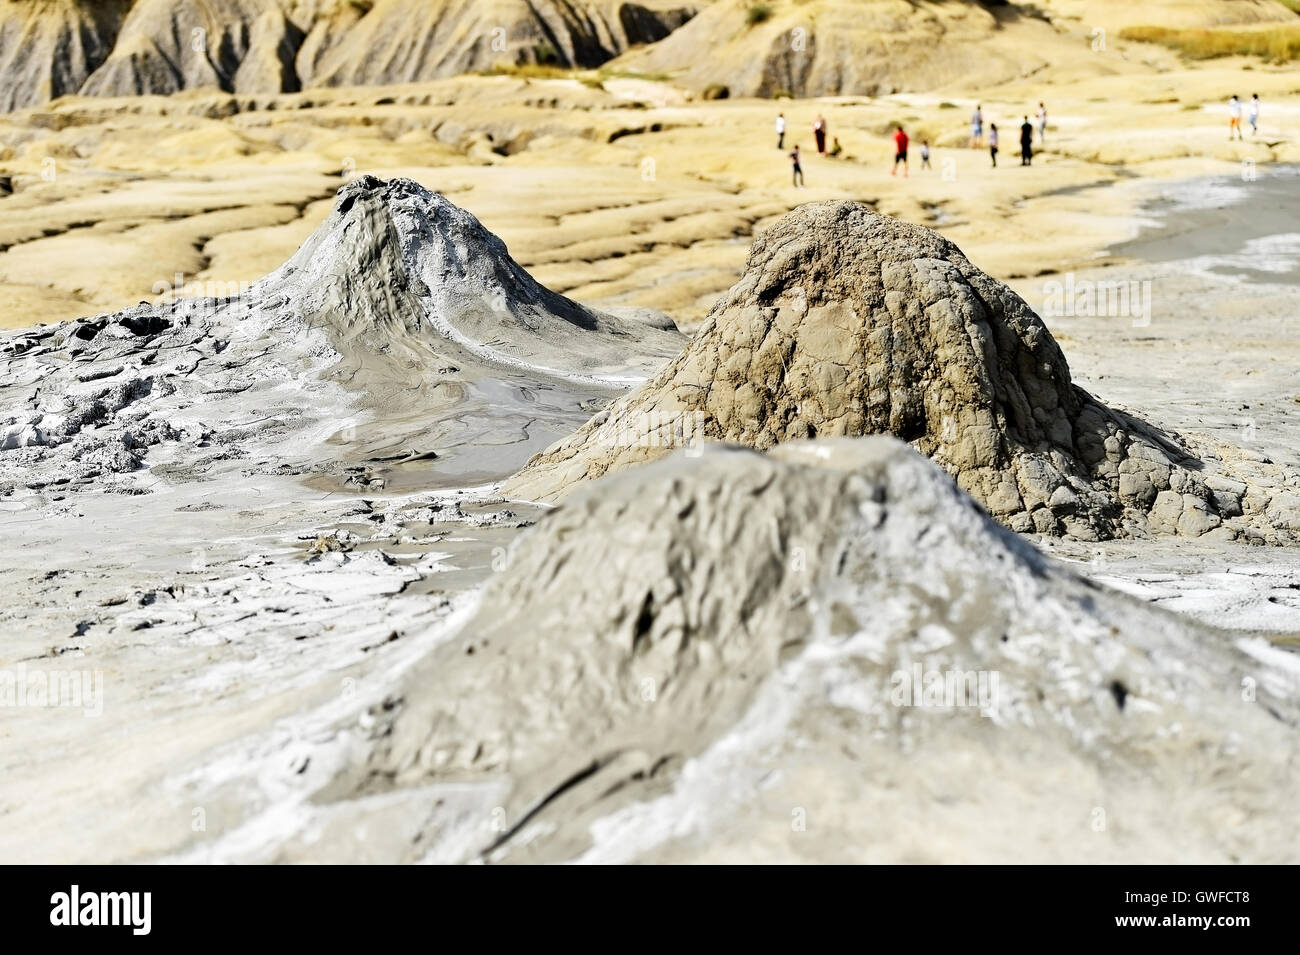 Landscape with mud volcanoes also known as mud domes erupting in summer Stock Photo